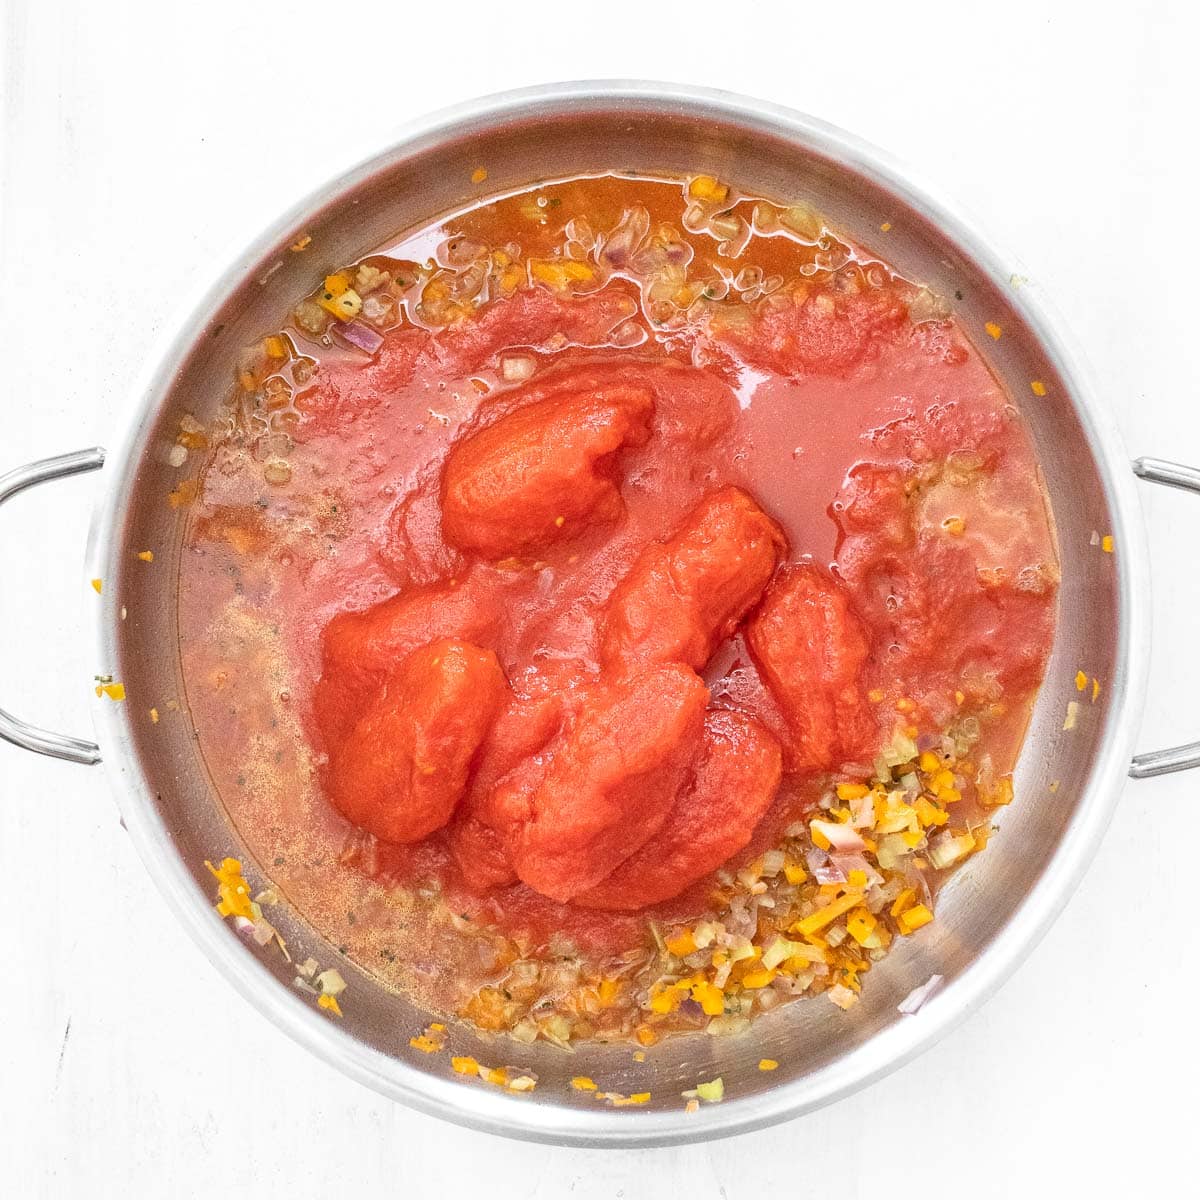 whole canned peel tomatoes in the pan